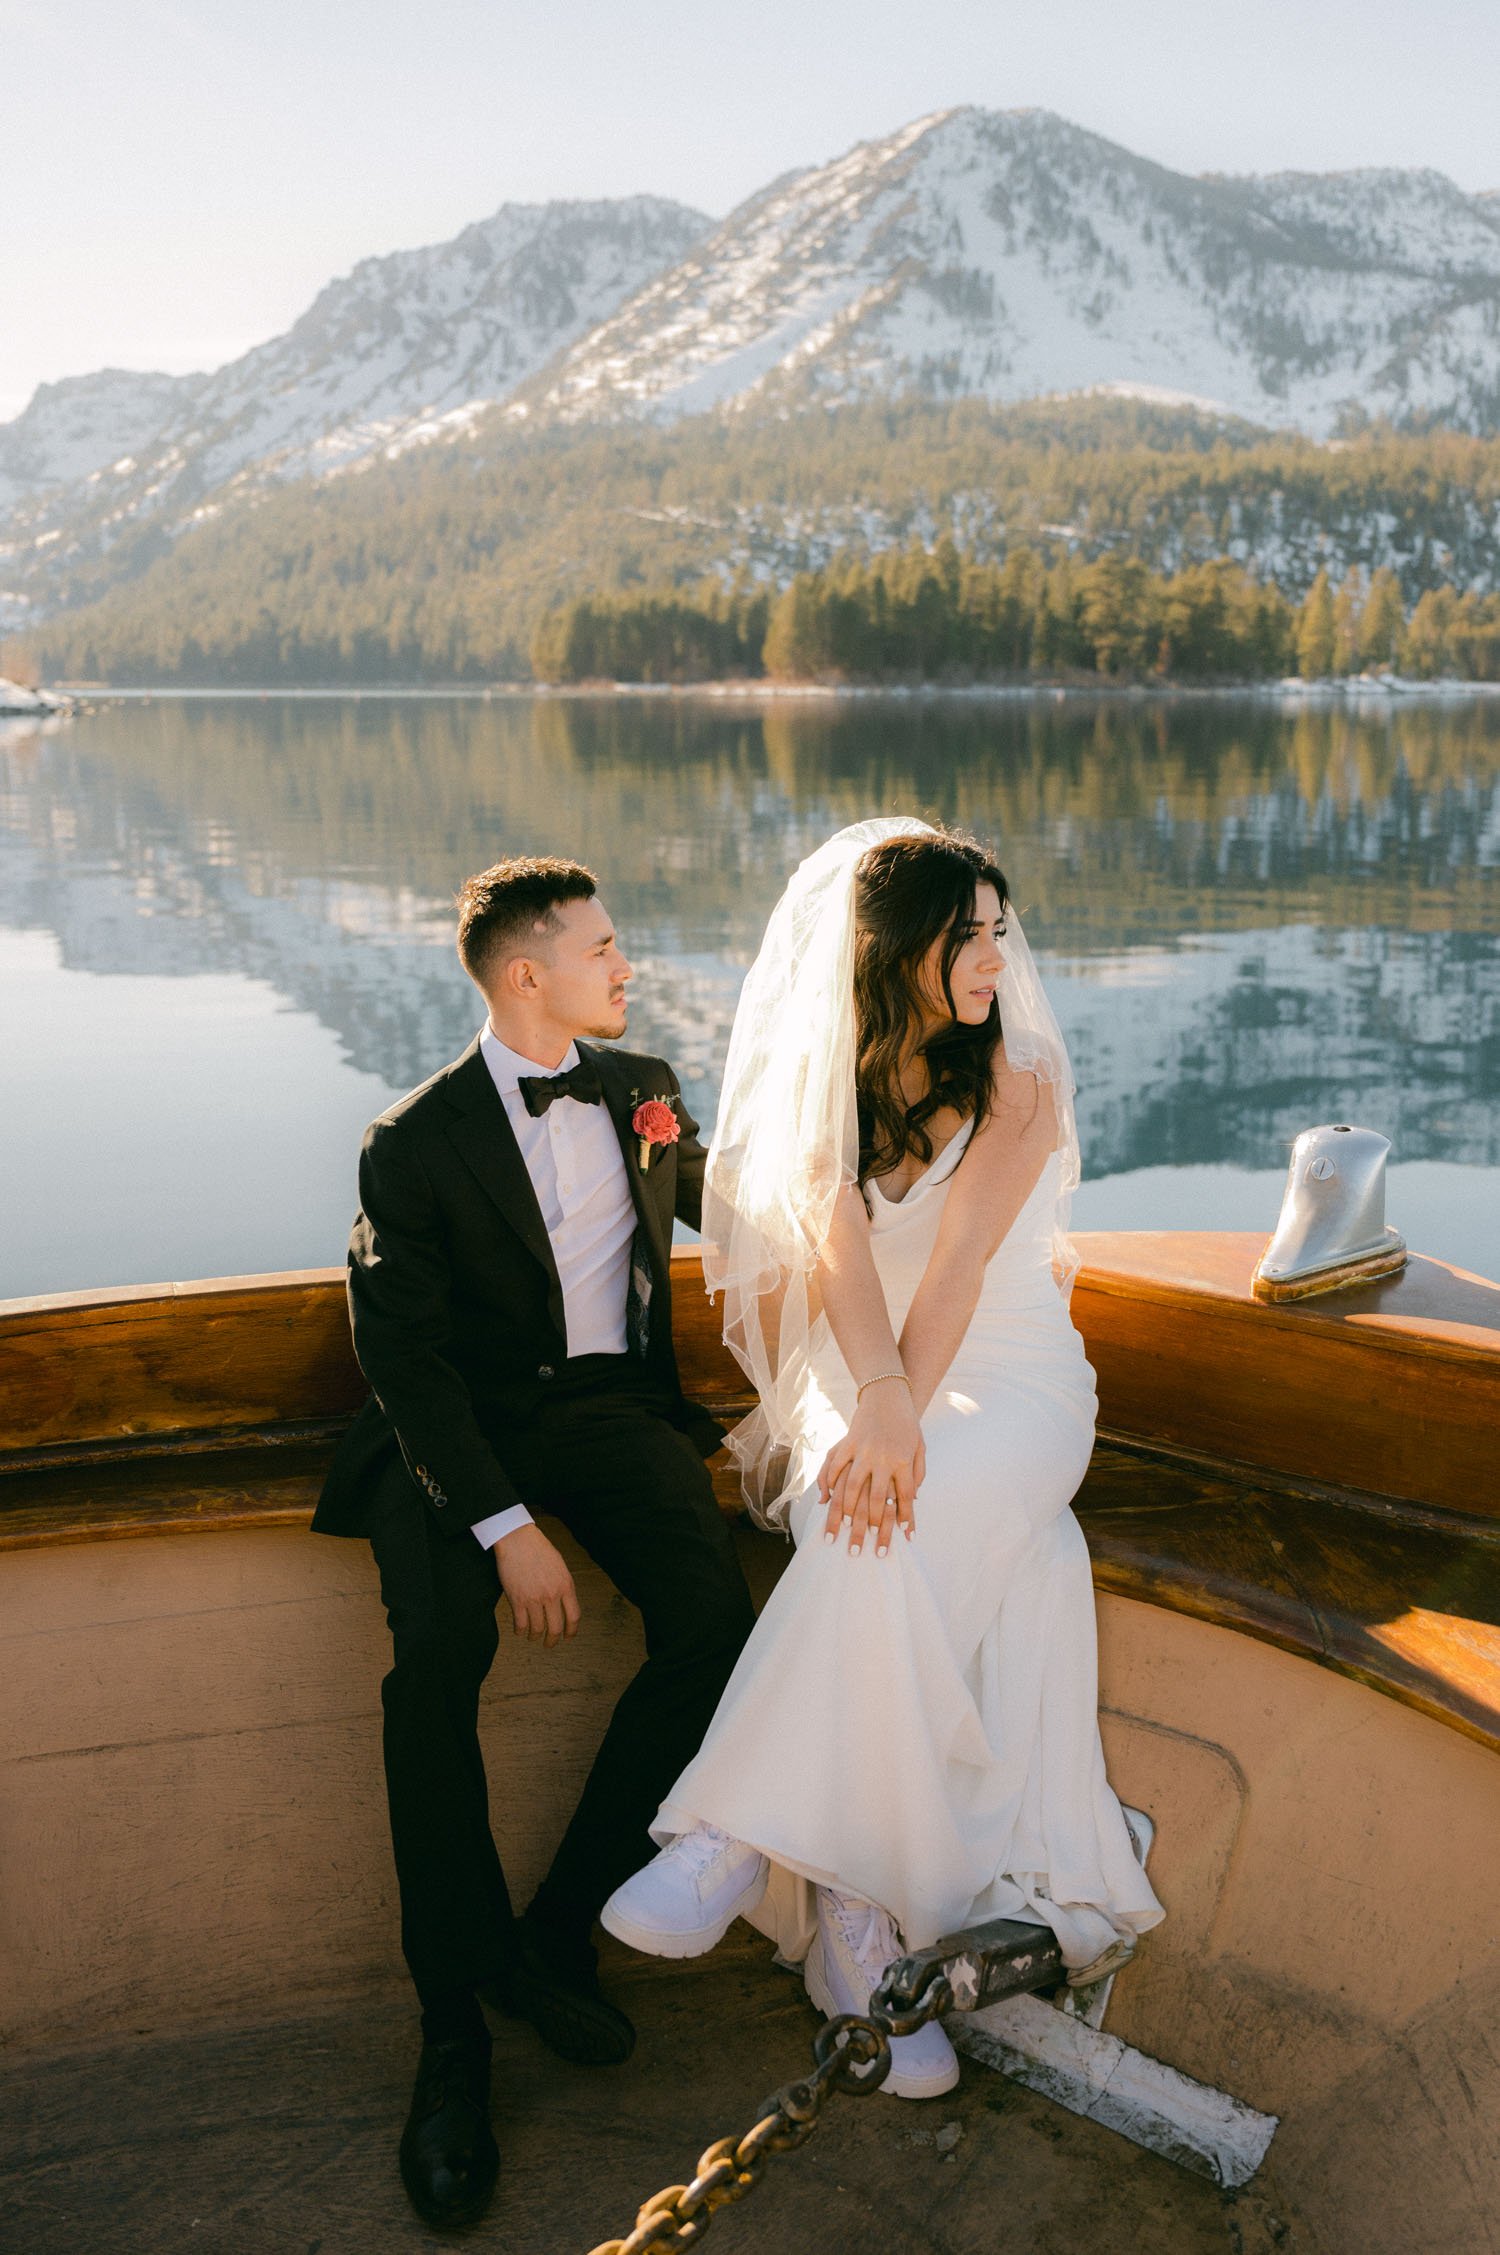 Tahoe Bleu Wave Wedding, photo of couple sitting on the boat during golden hour